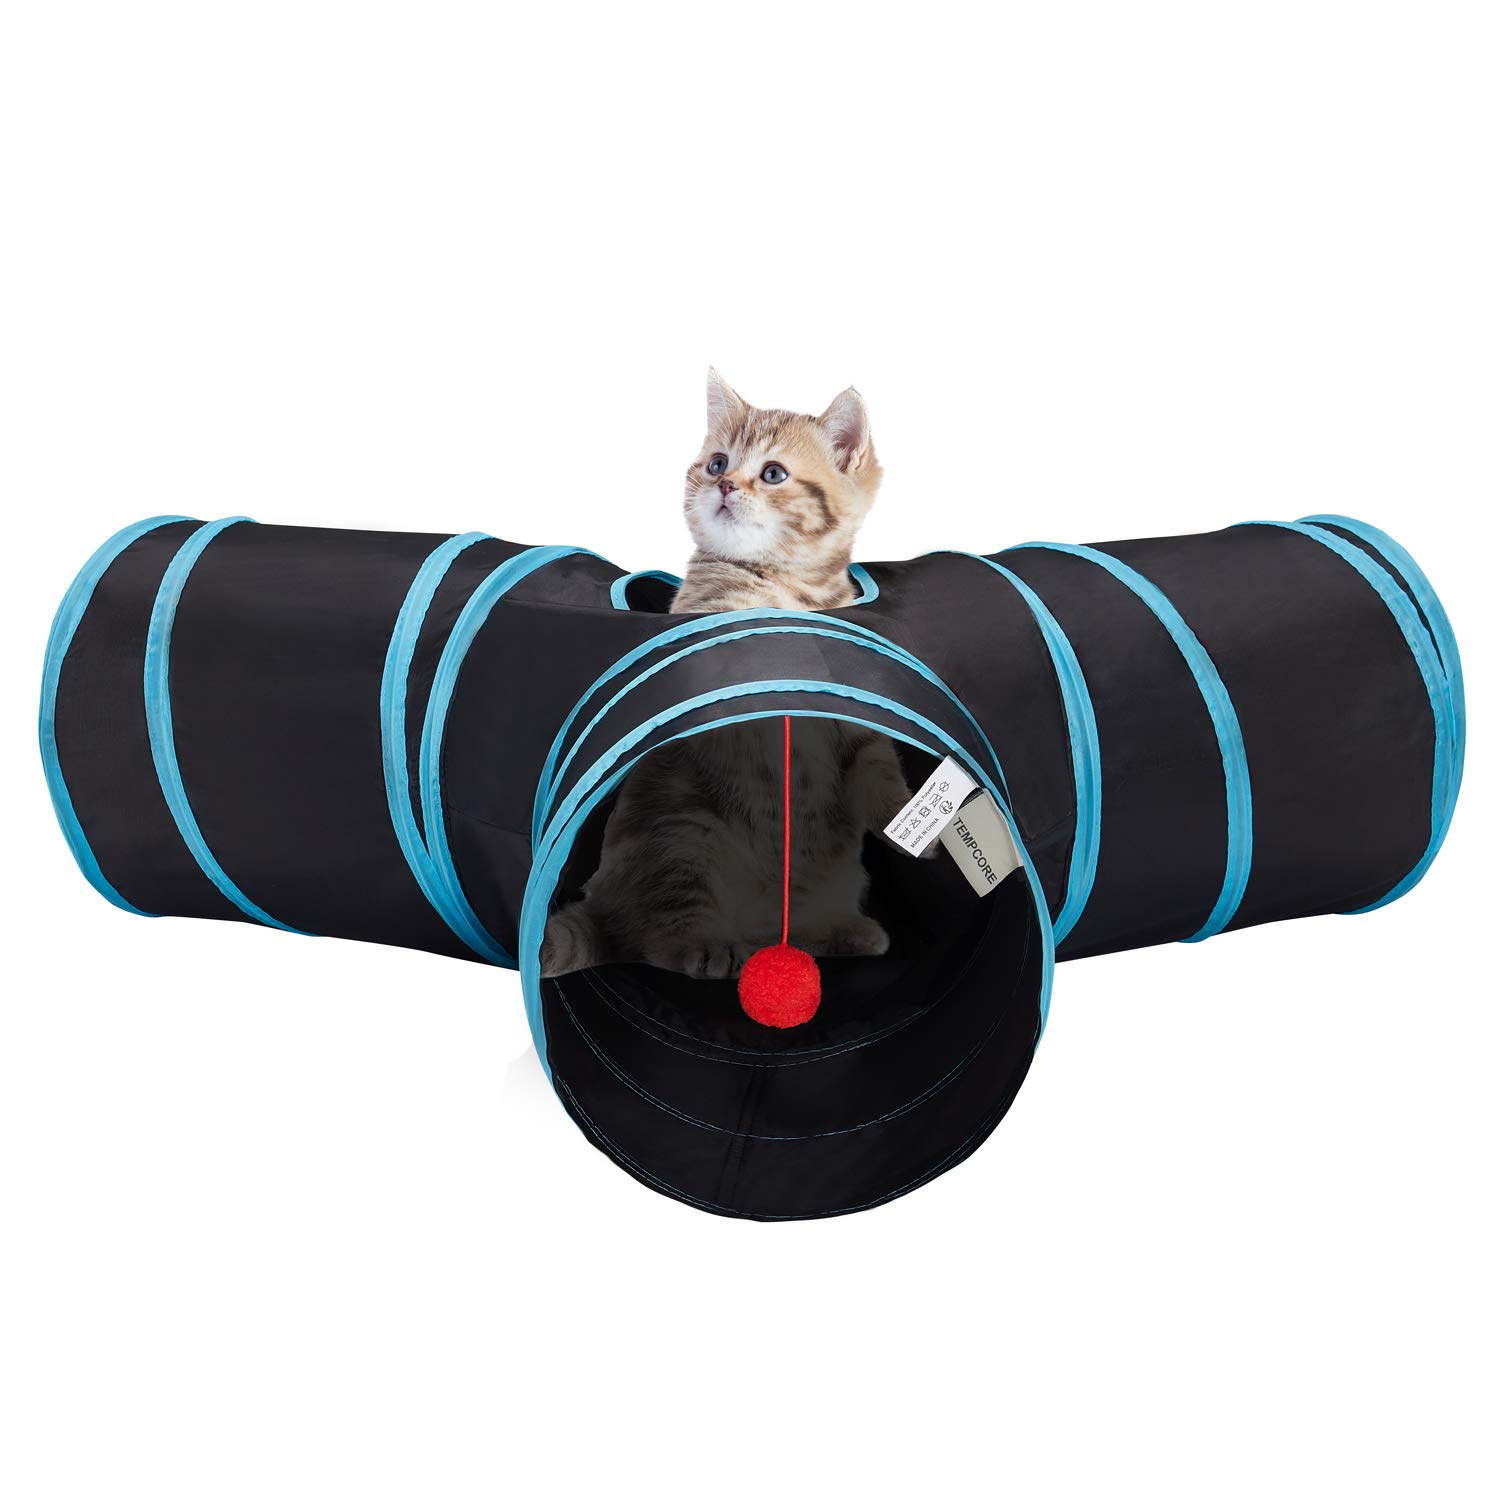 Cat Tunnels for Indoor Tube Cat Toys